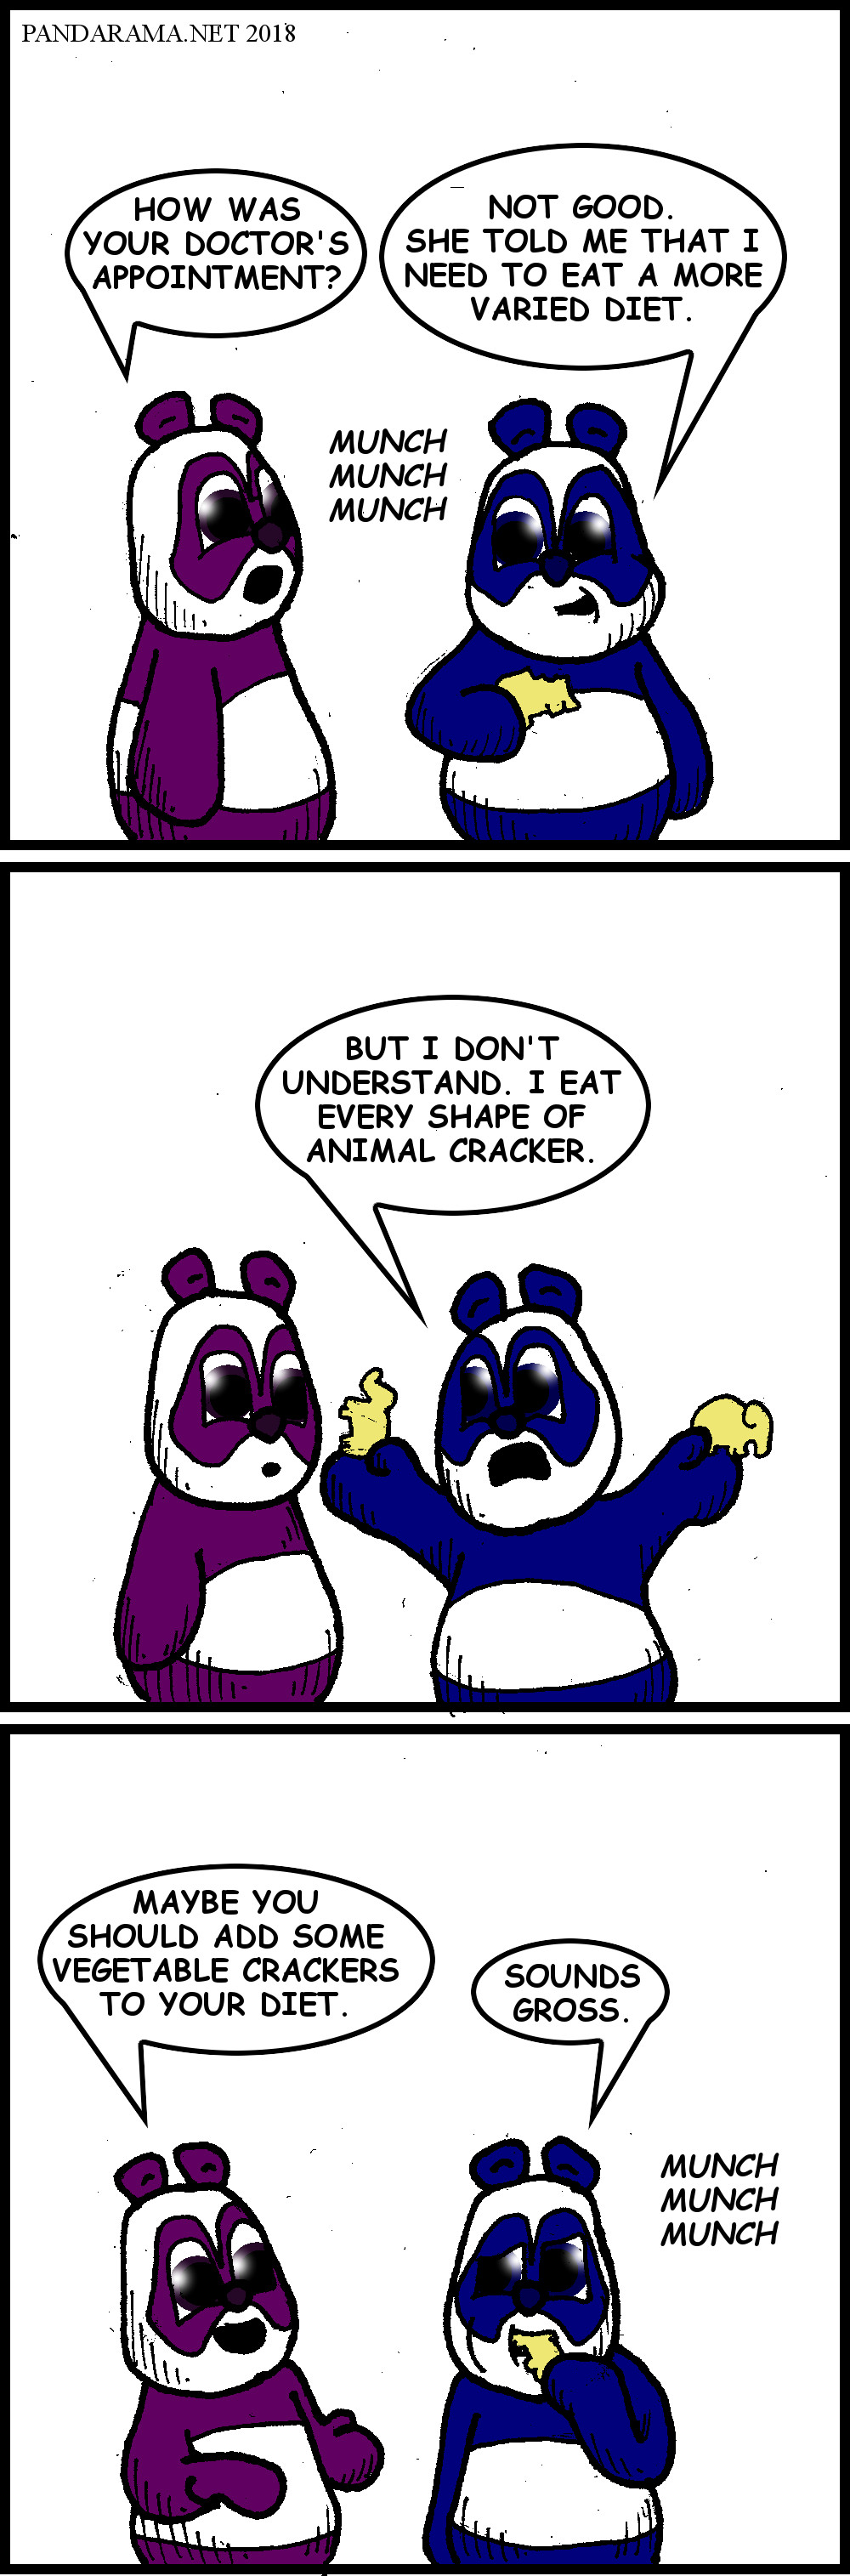 panda 1: the doctor says that i need to eat a more varied diet, but i eat all the shapes of animal crackers. panda 2: maybe you should eat some vegetable crackers. panda 1: sounds gross.